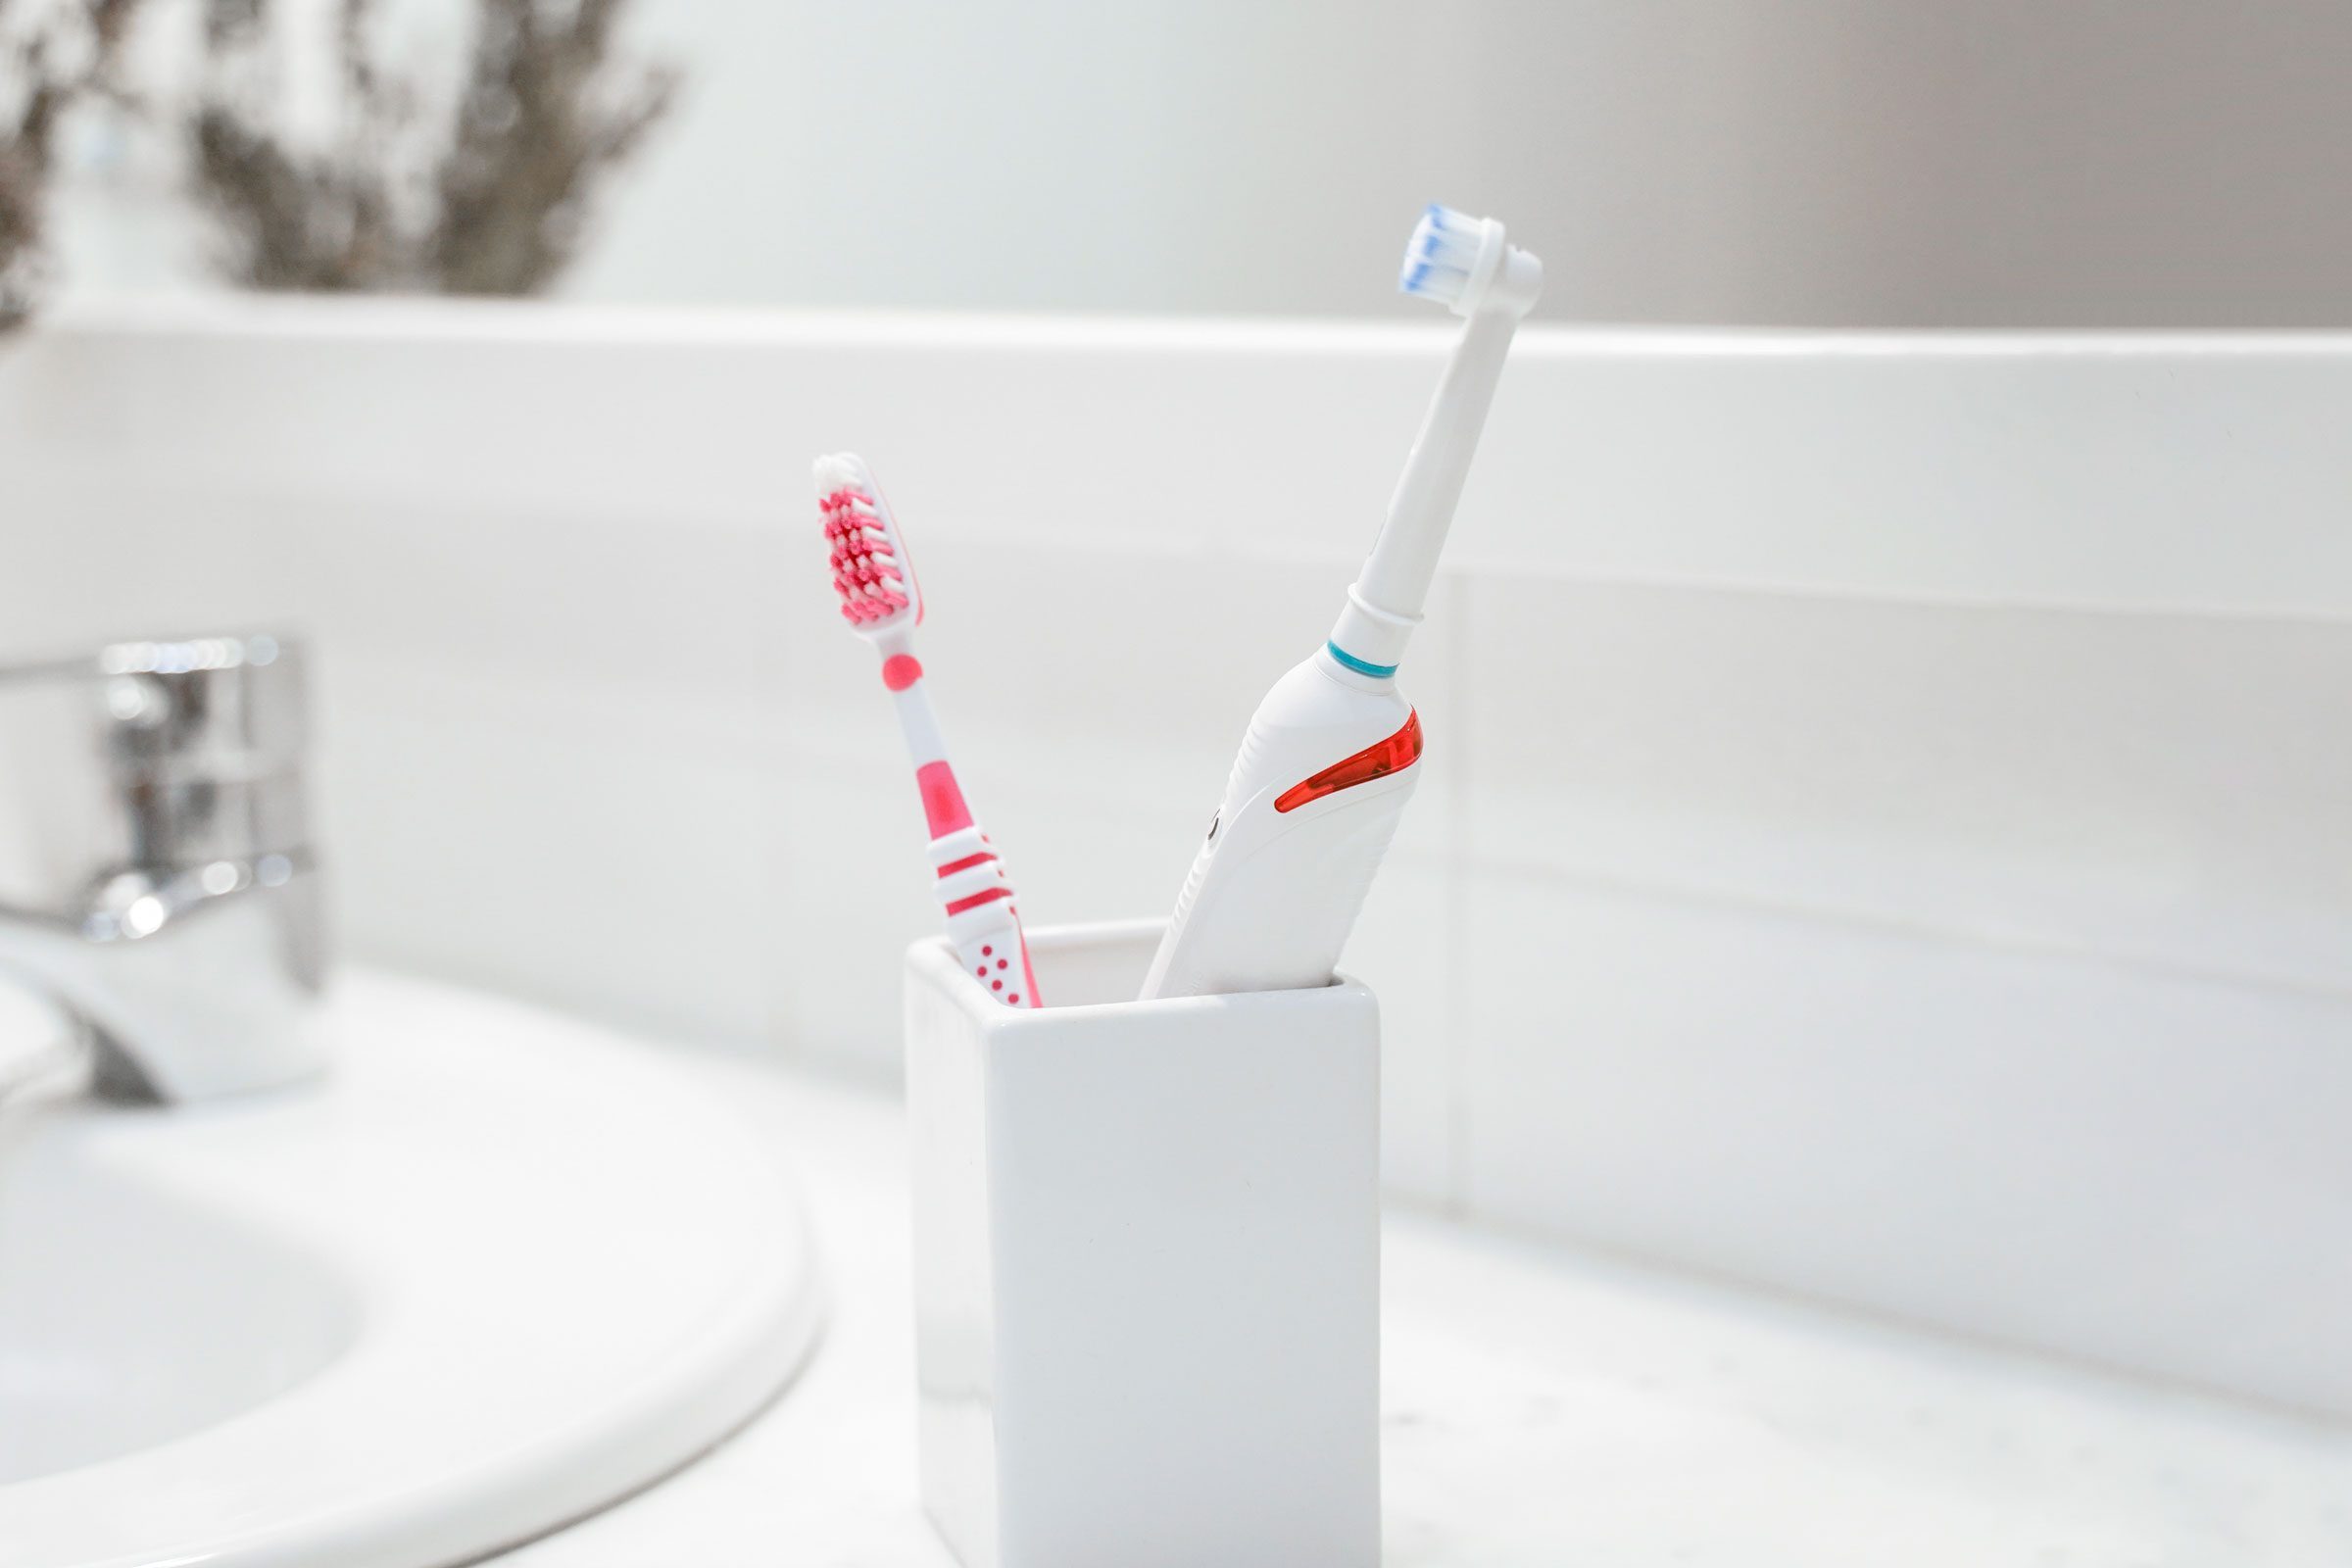 https://www.familyhandyman.com/wp-content/uploads/2023/02/two-toothbrushes-in-white-bathroom-GettyImages-1282648003-MLedit.jpg